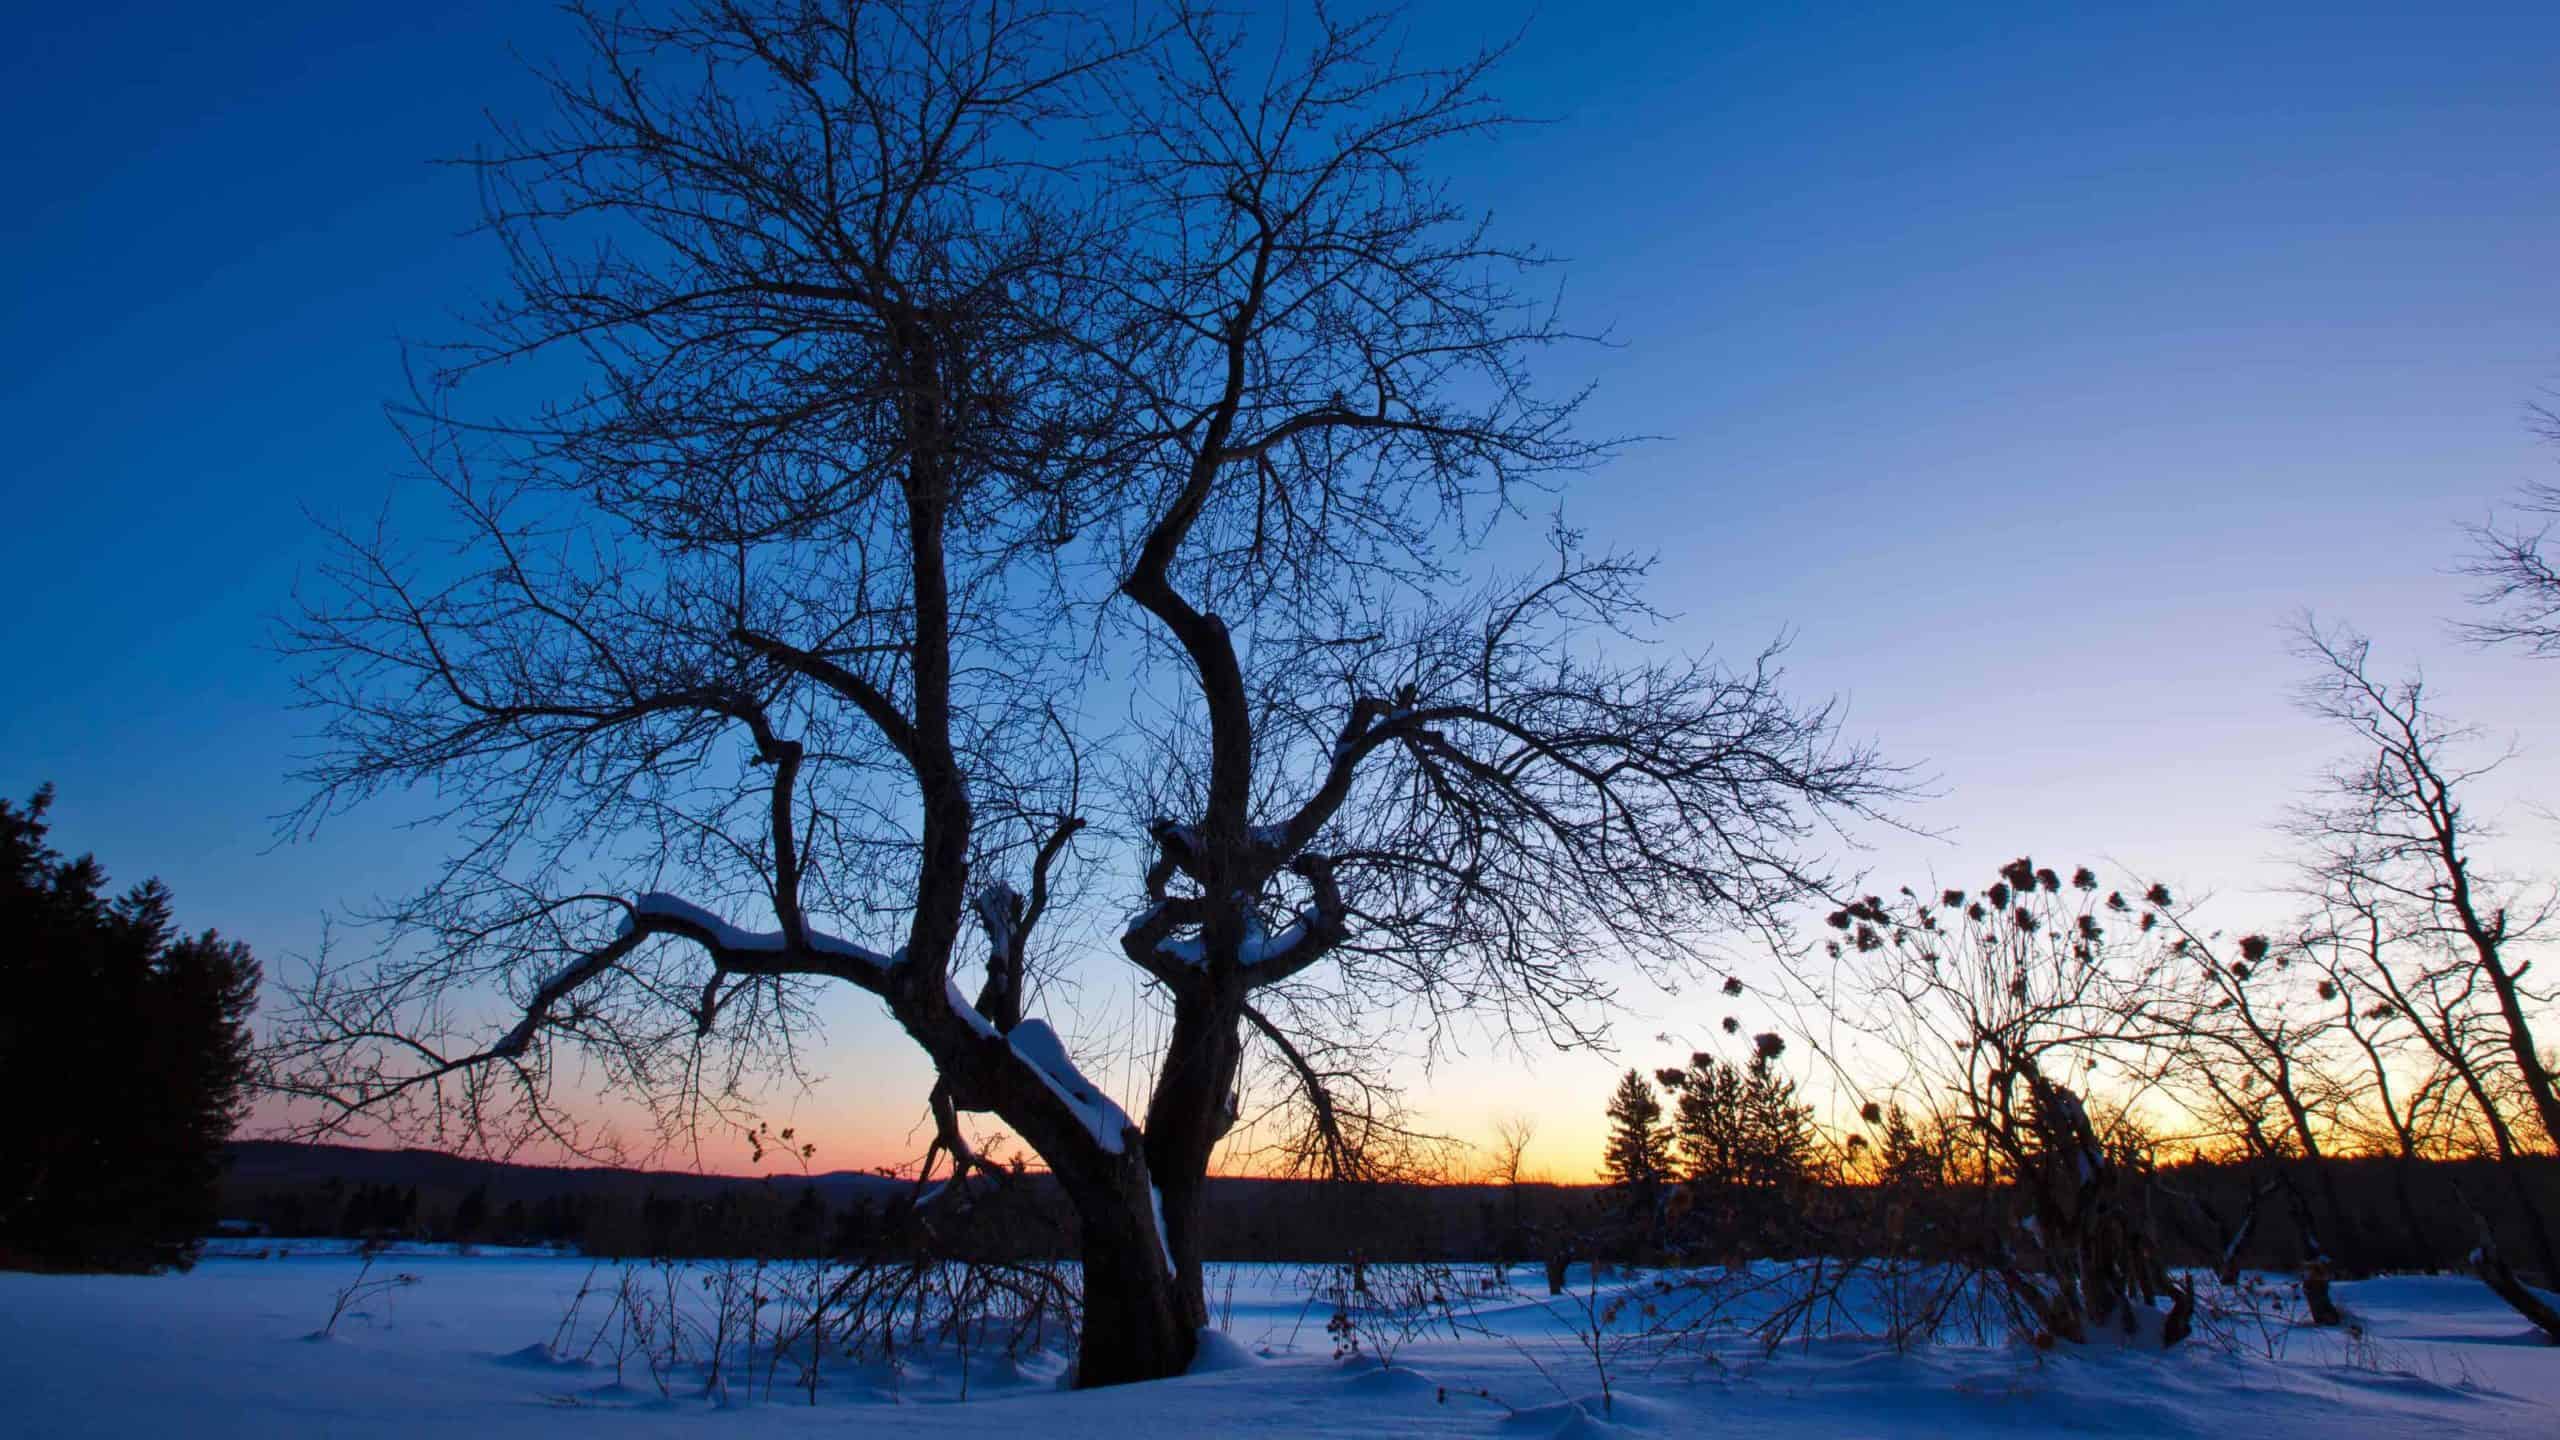 An apple tree at sunset. Winter at the Notchview Reservation in Windsor, Massachusetts. Courtesy of the Trustees of Reservations.